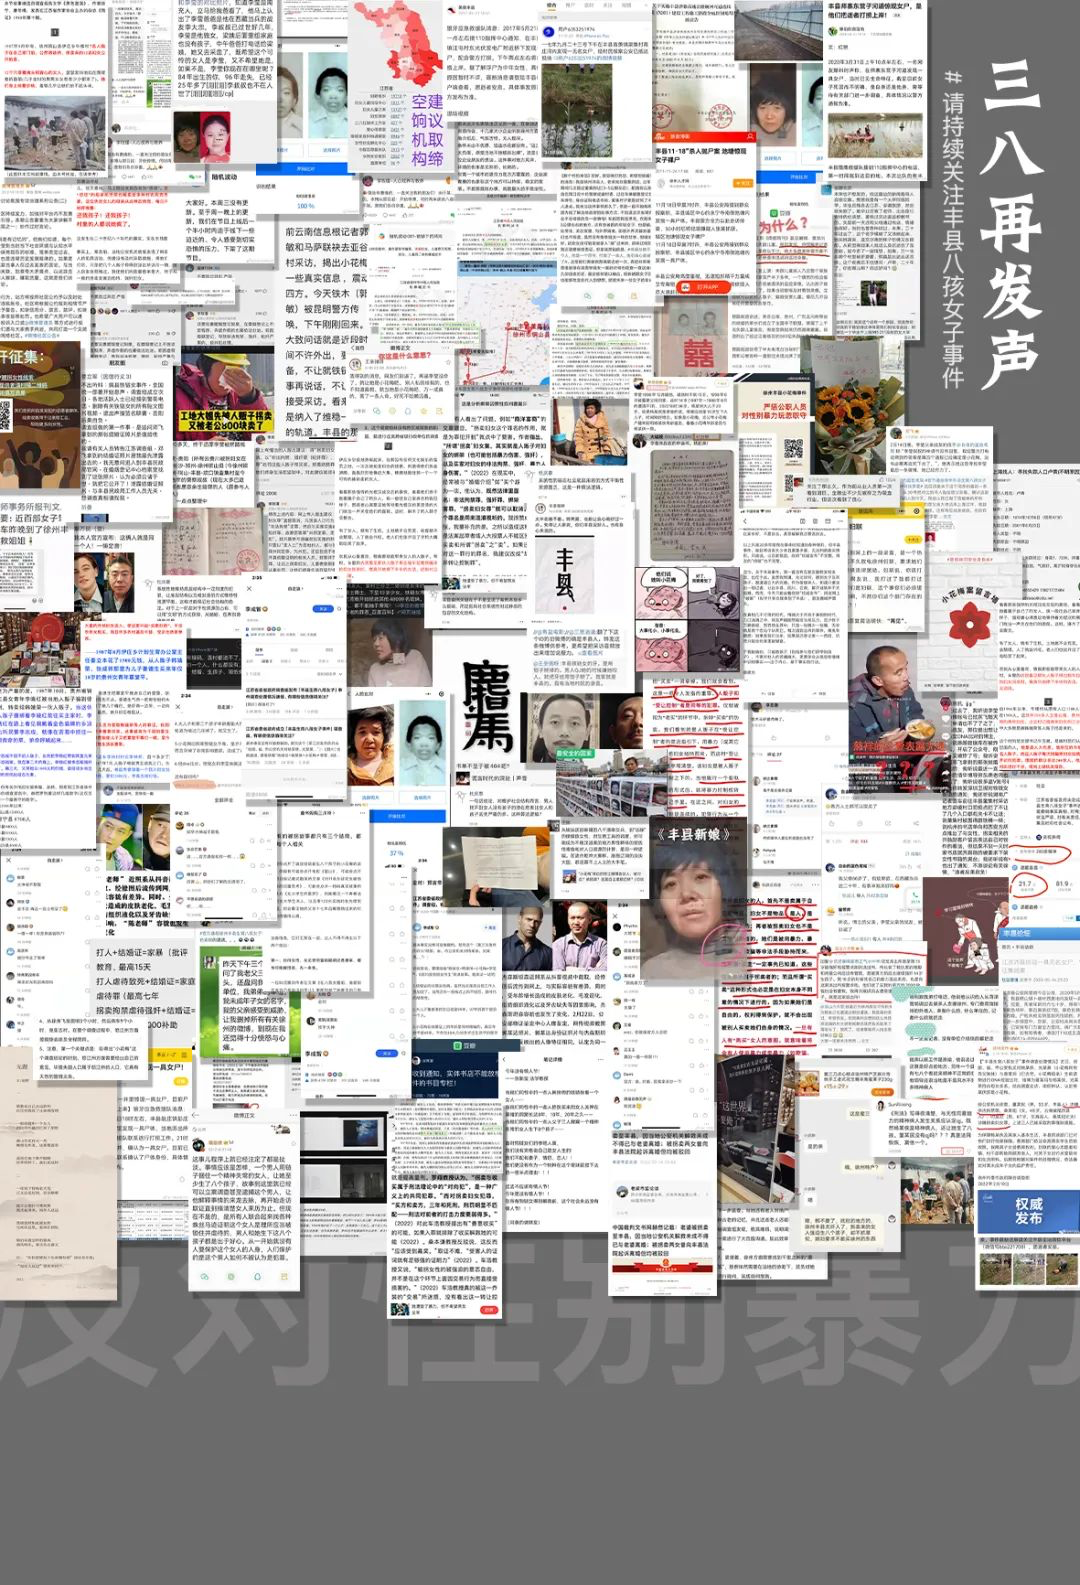 A large collage of screenshots related to Xiaohuamei’s trafficking case, with the messages: “On March 8, keep speaking out,” “Fight Gender-based Violence,” and the hashtag #PleaseKeepPayingAttentionToXuzhouMother-of-8Case.